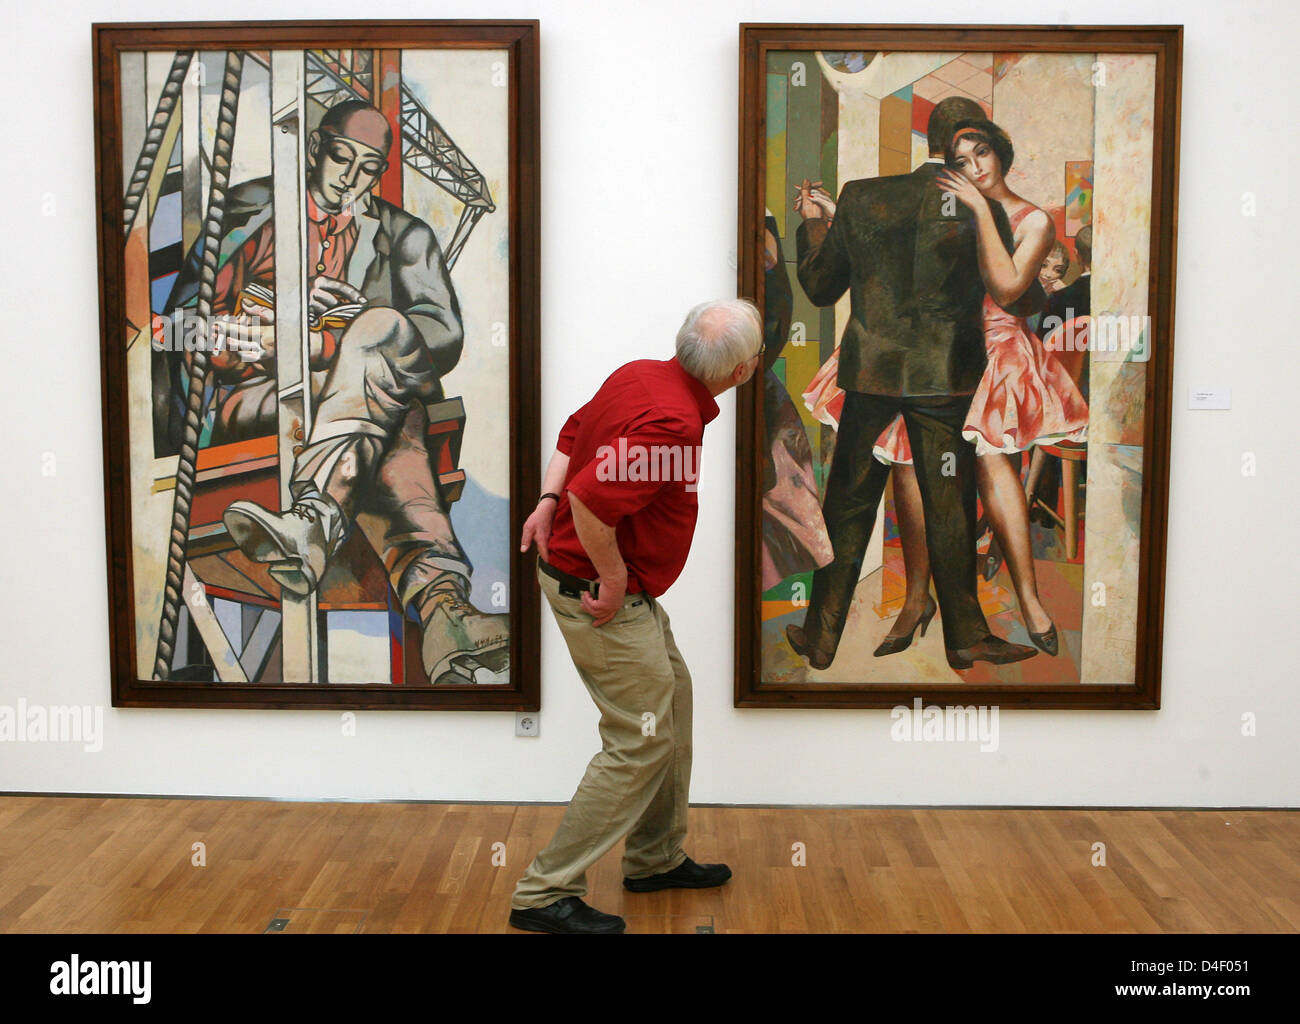 A male visitors takes a close look at Willi Sitte's paintings 'Tanzendes Paar' (R, 1961, Dancing Couple) and 'Arbeitspause' (1959, Break from Work) at the Willi-Sitte-Gallery in Merseburg, Germany, 29 May 2008. The gallery shows paintings on the subject of 'The working man' by Sitte, Otto Dix (1891-1969) and Bottrop-based artist Bernhardine Luetzenburg. Two exhibitions will show th Stock Photo